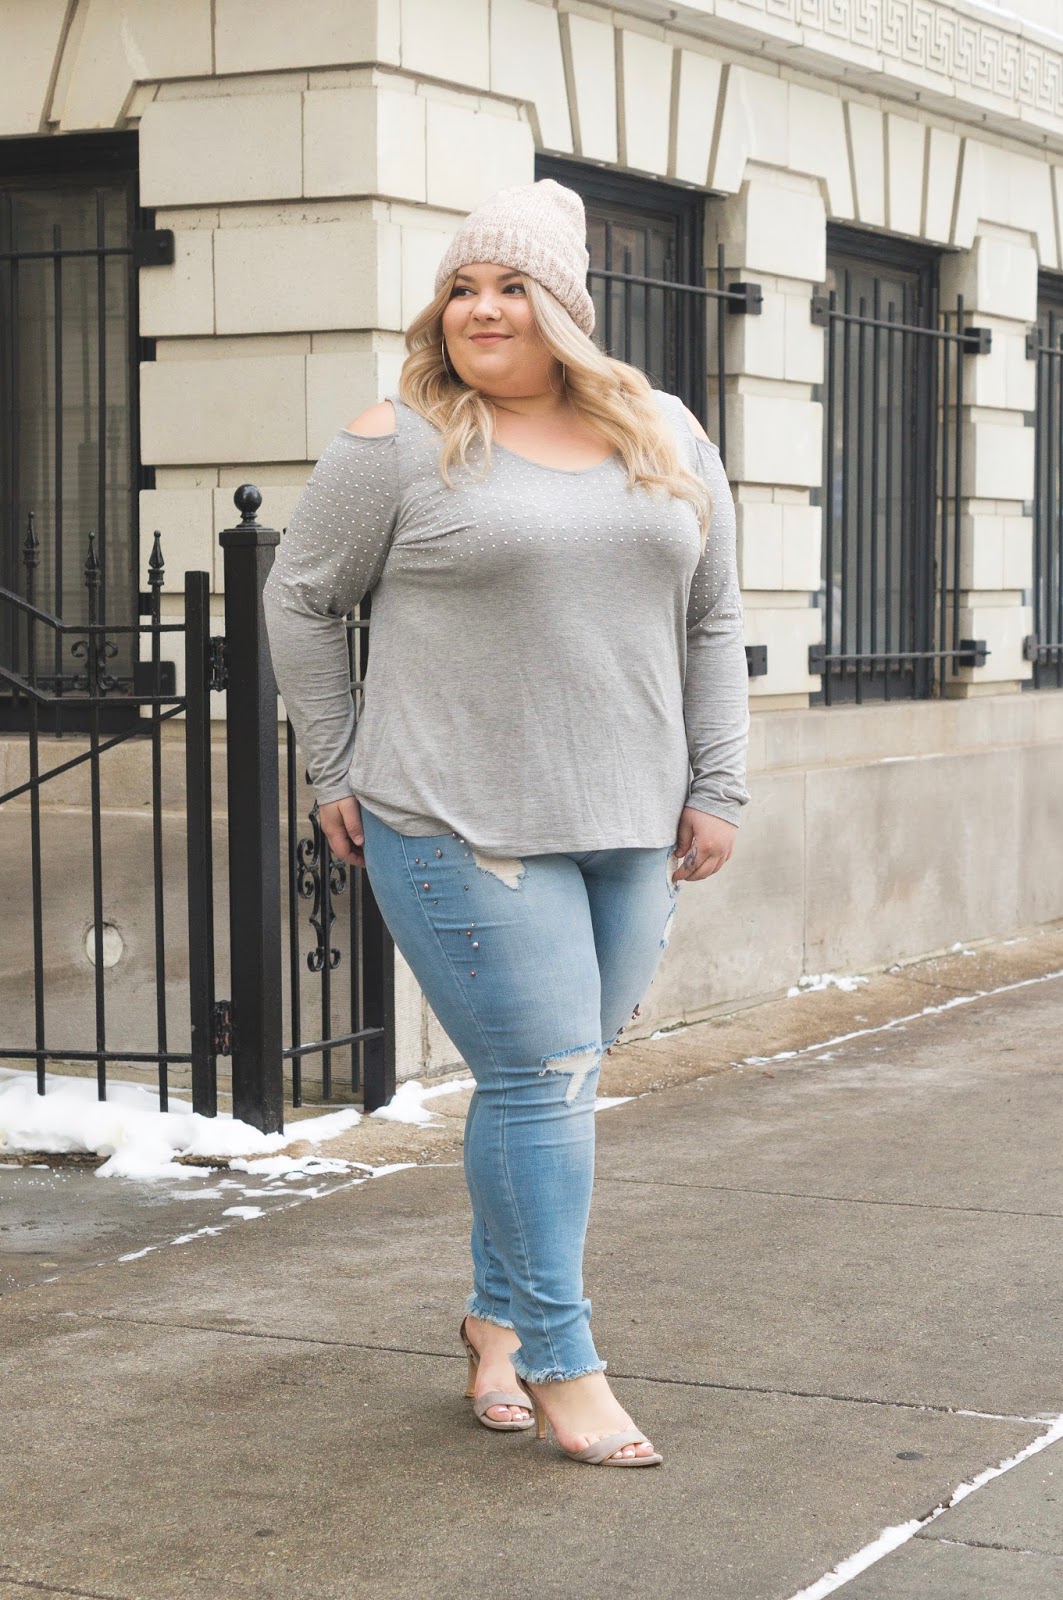 natalie in the city, natalie craig, plus size fashion blogger, Chicago fashion blogger, plus size fashion, affordable plus size clothing, embrace your curves, off your beauty standards. body positive, curves and confidence, rebel wilson x angels, pearl jeans, plus size denim